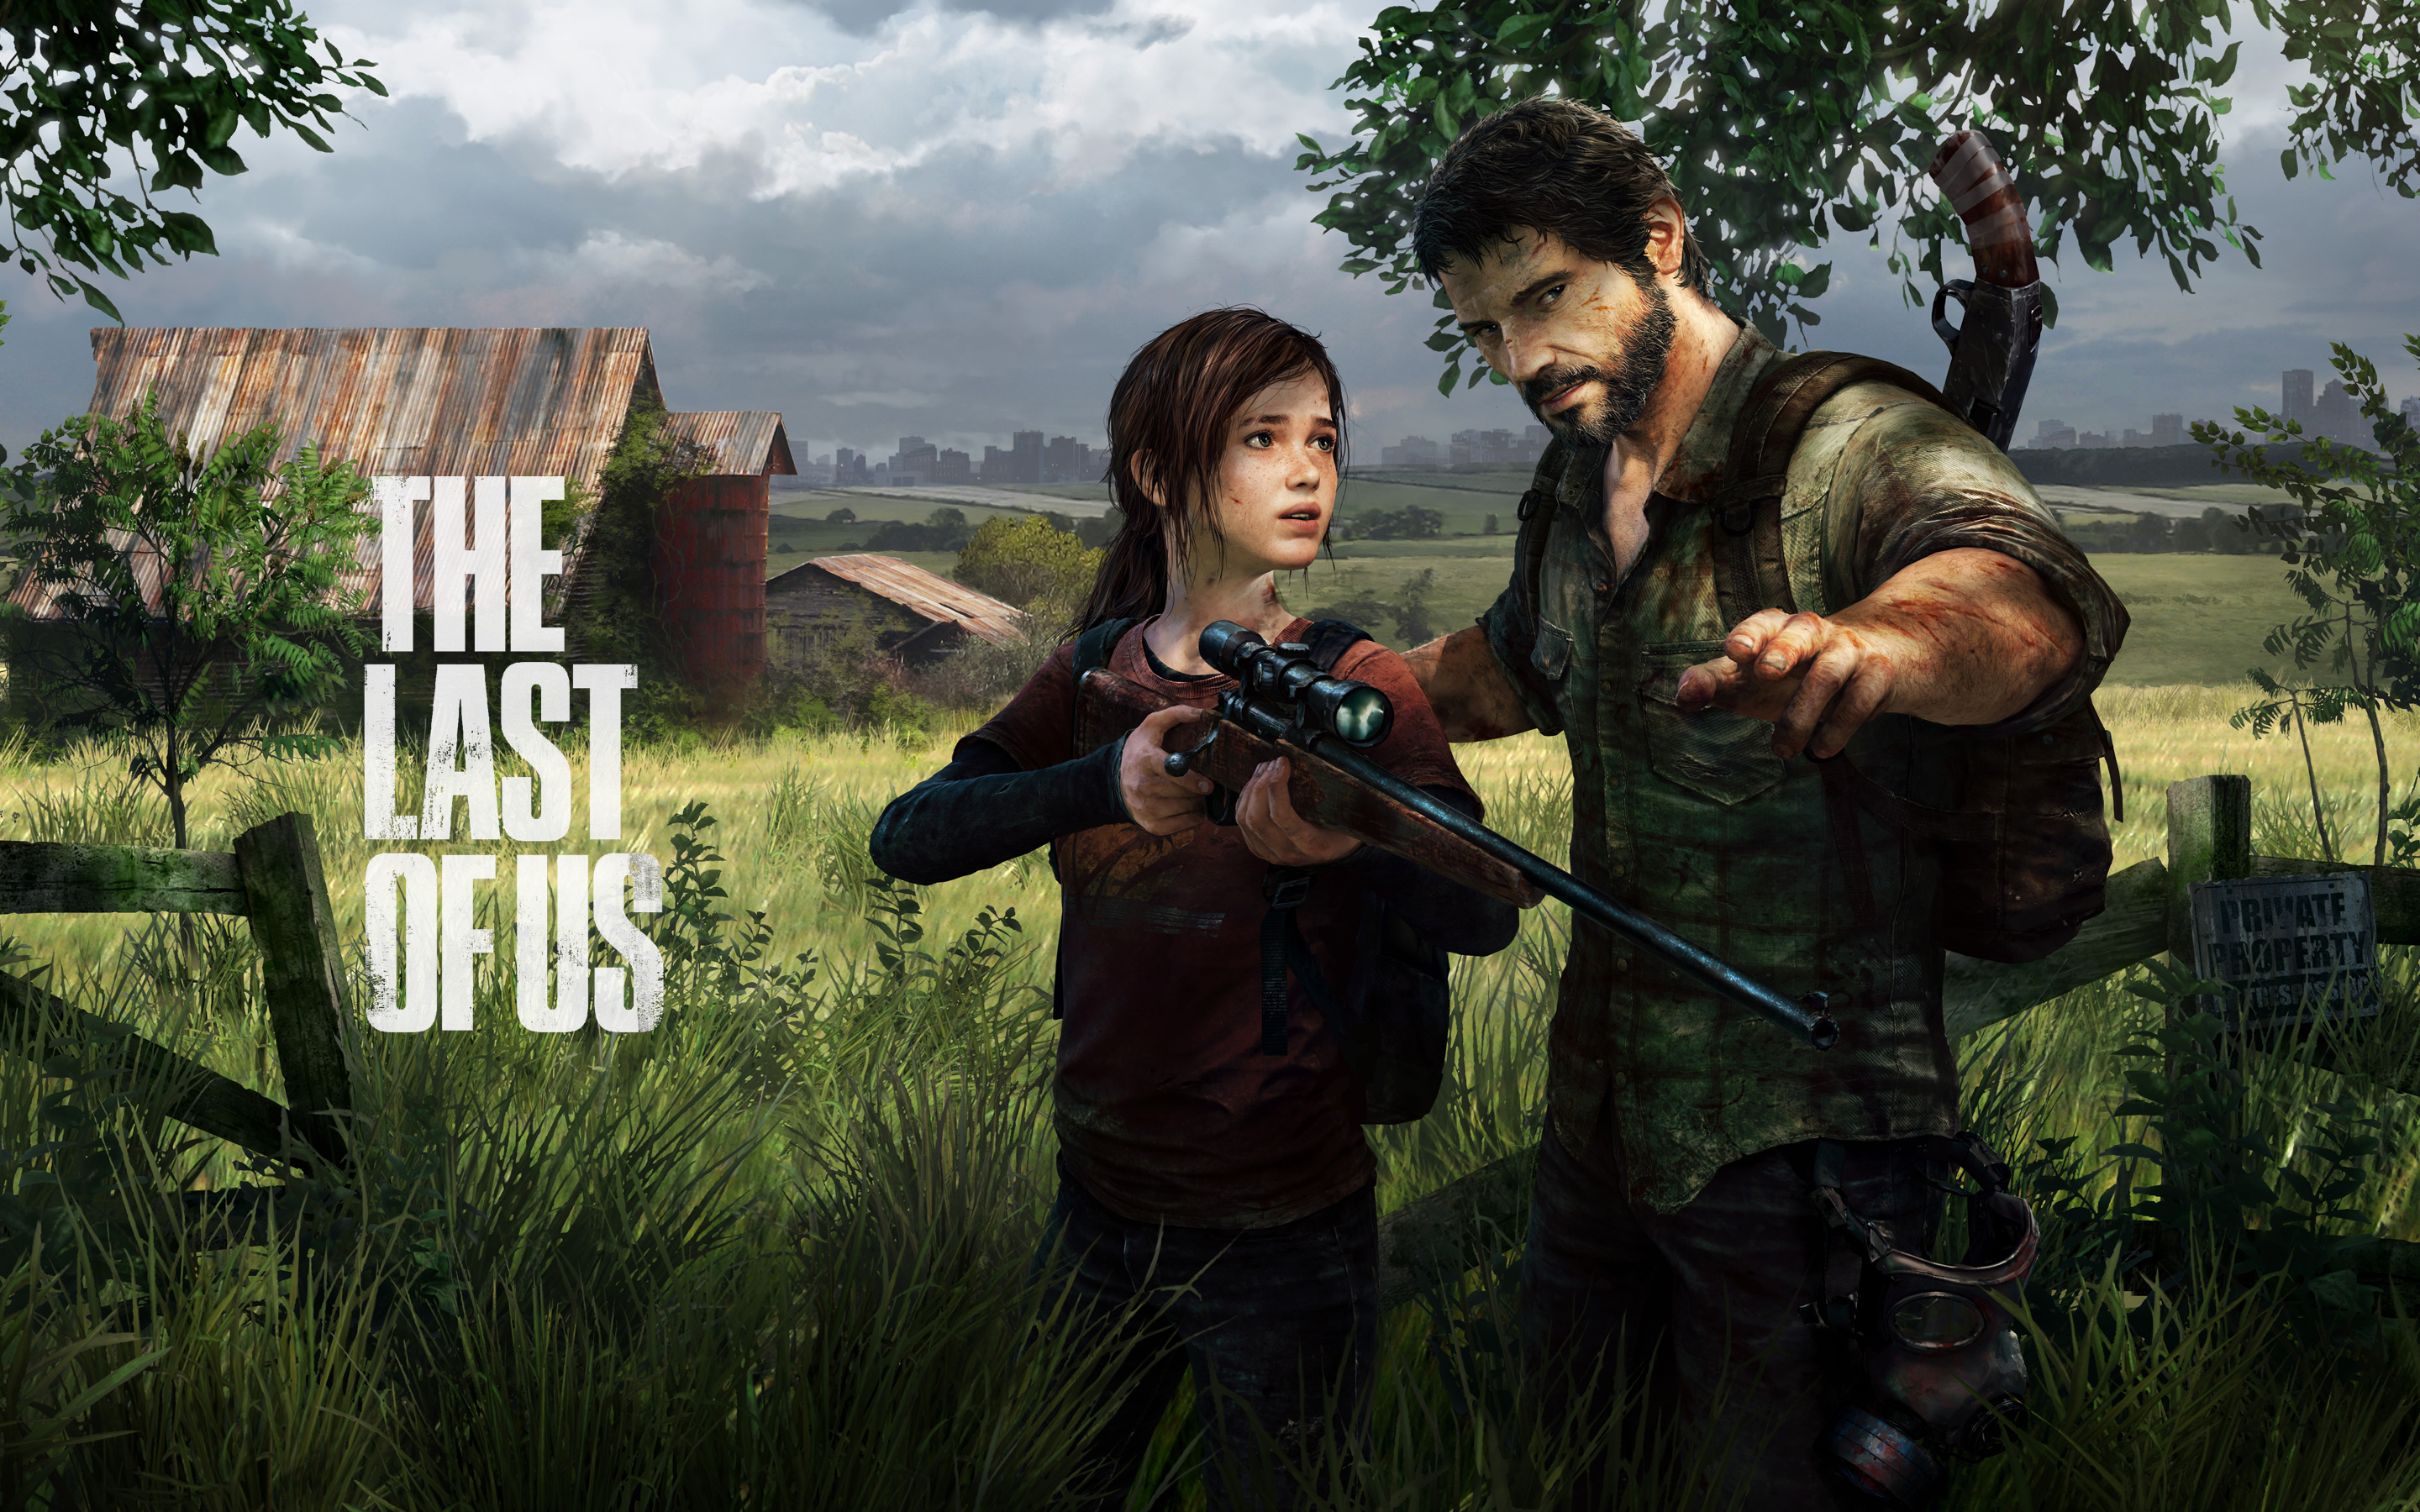 Sony lets slip hint that The Last of Us may be coming to PS4